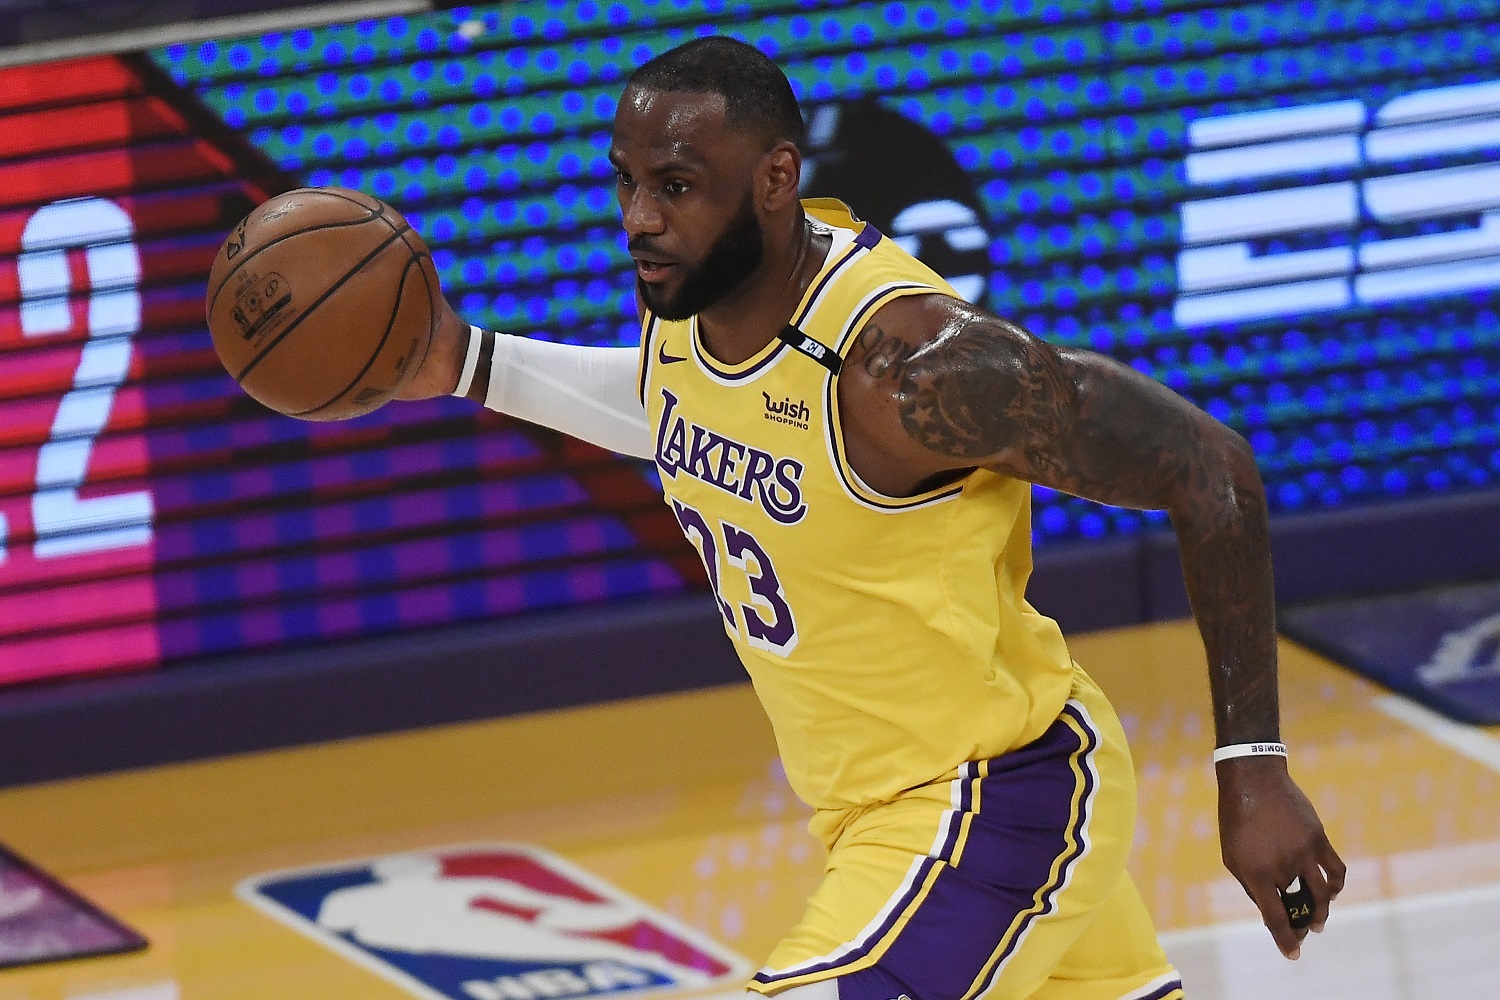 LeBron James of the Los Angeles Lakers dribbles during the first half of an NBA play-In game against the Golden State Warriors on May 19, 2021 in Los Angeles. | Kevork Djansezian/Getty Images